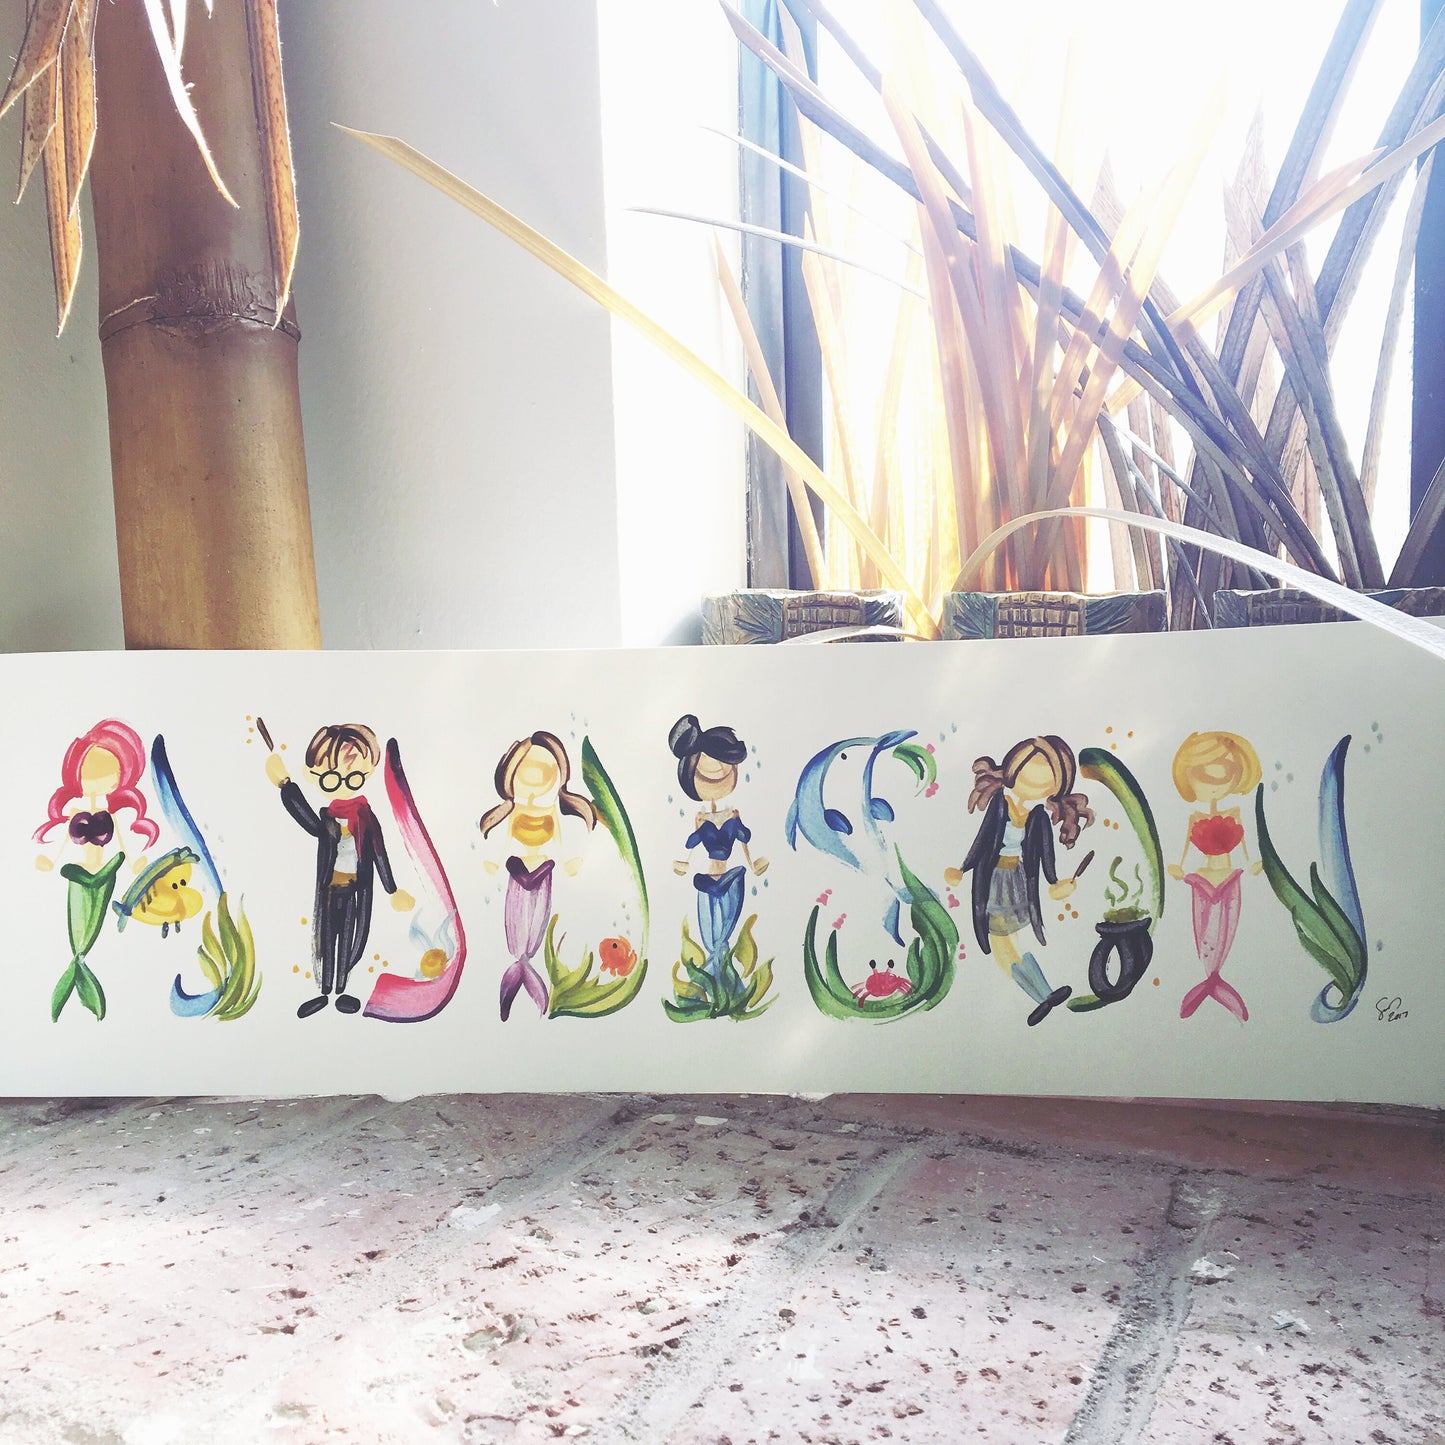 Mix-and-match themed name featuring Mermaids and Wizards with the name "ADDISON"